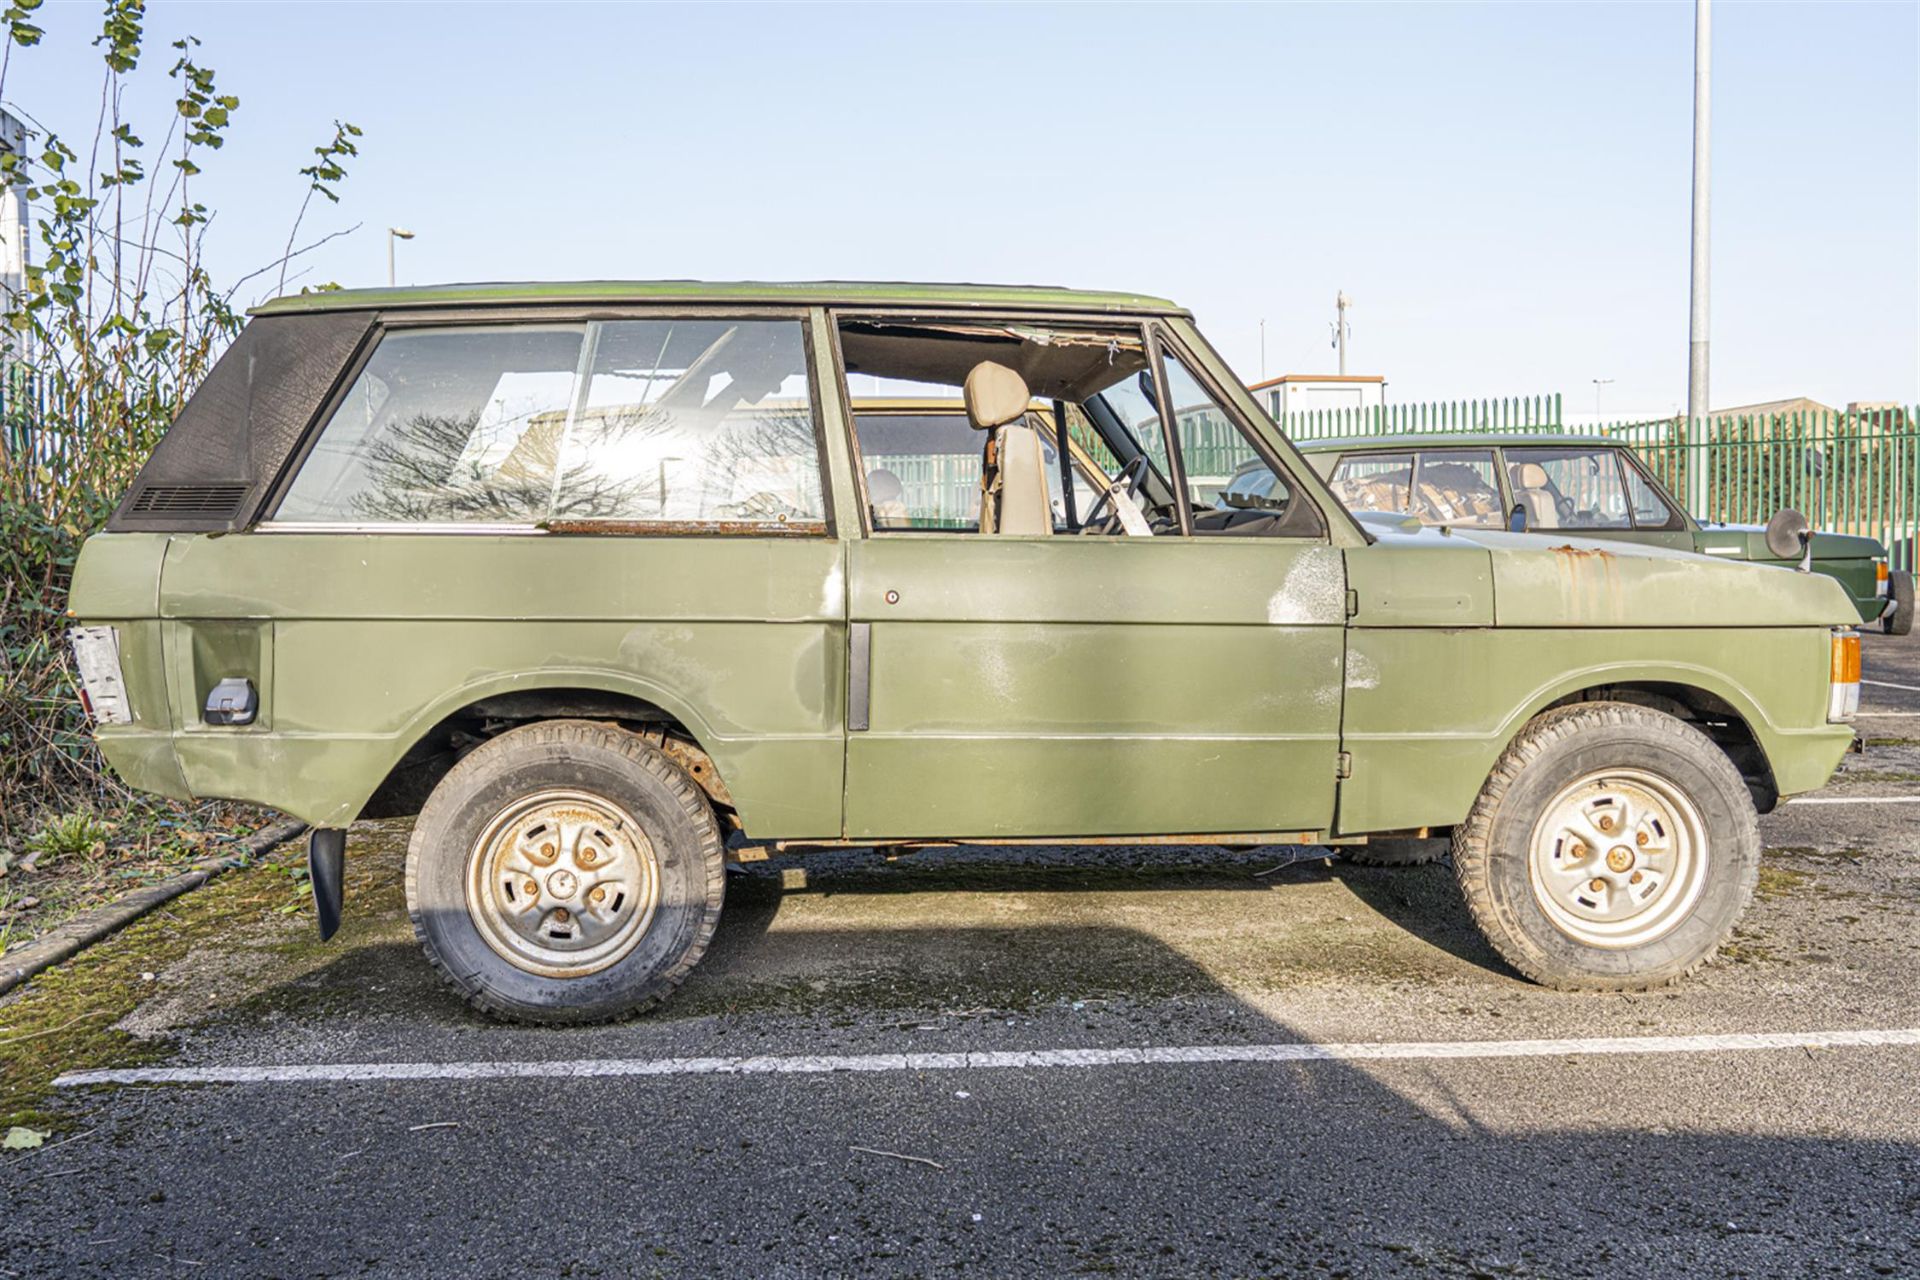 1975 Range Rover 'Suffix D' - Image 3 of 5